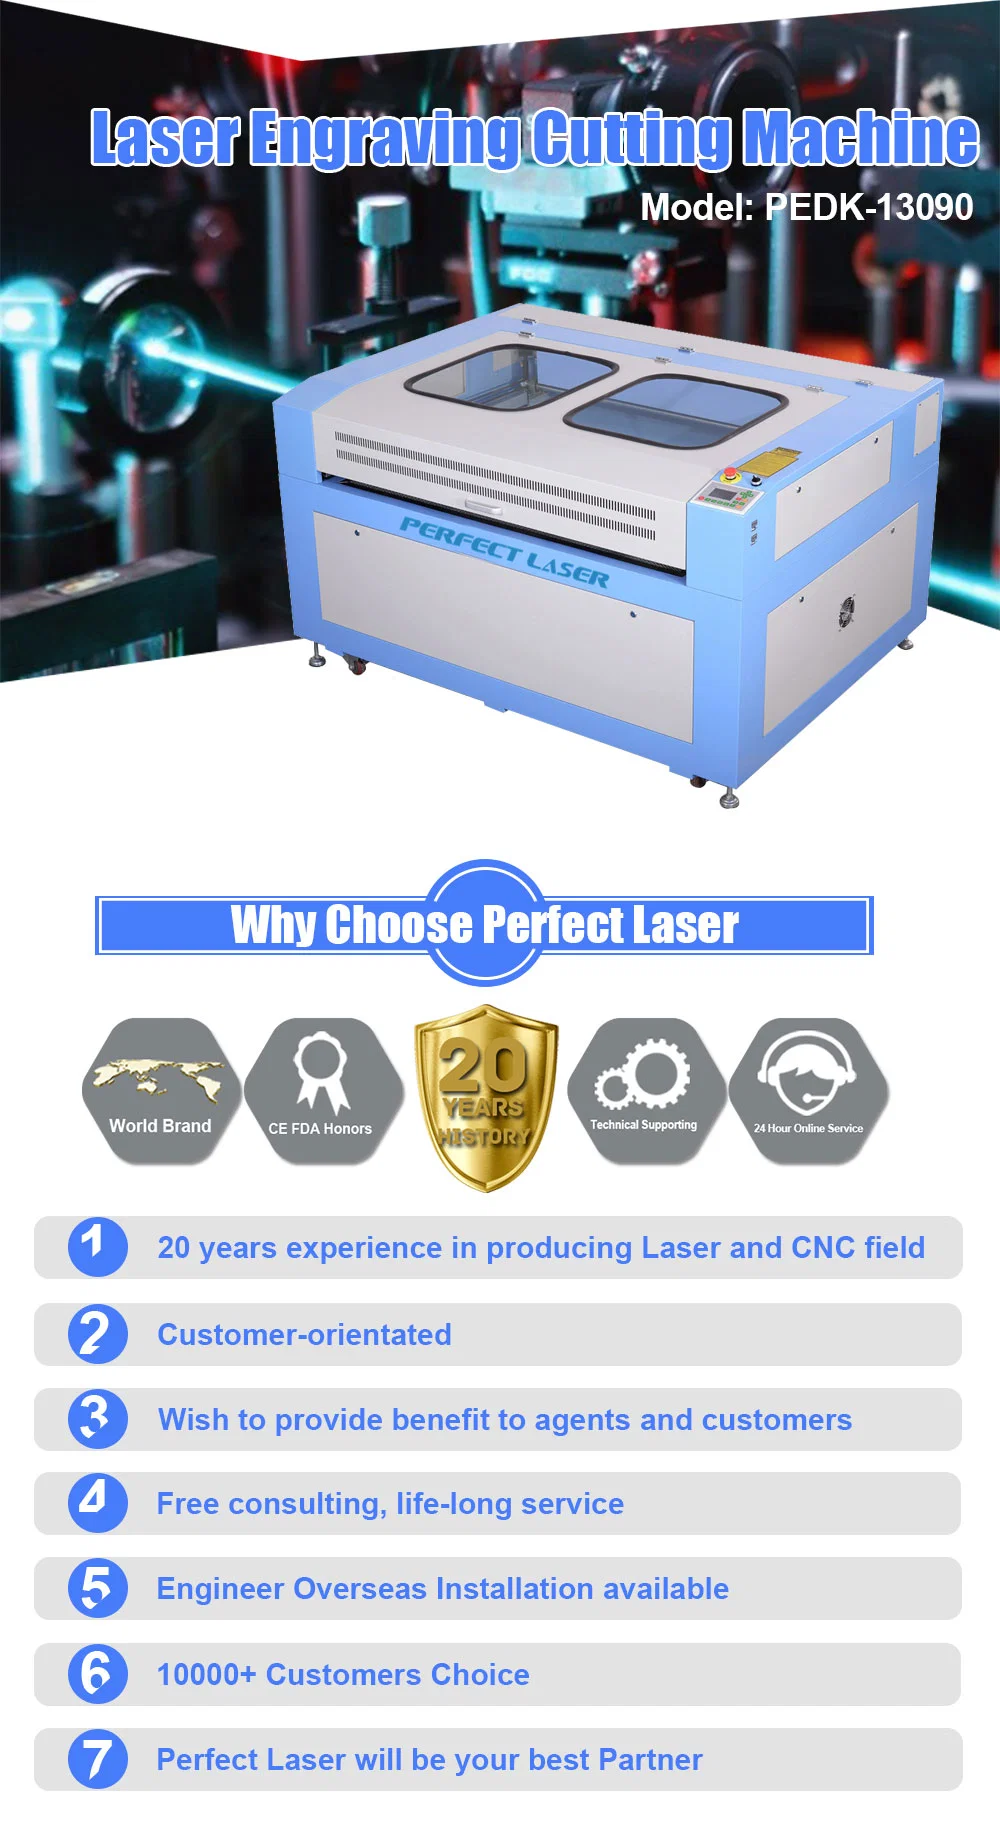 60W 80W 100W 120W 150W 180W CNC Wood/Acrylic/Plastic/Glass/Fabric/Textile/Leather 1390 CO2 Laser Router Engravers Cutters Engraving Cutting Machines Price